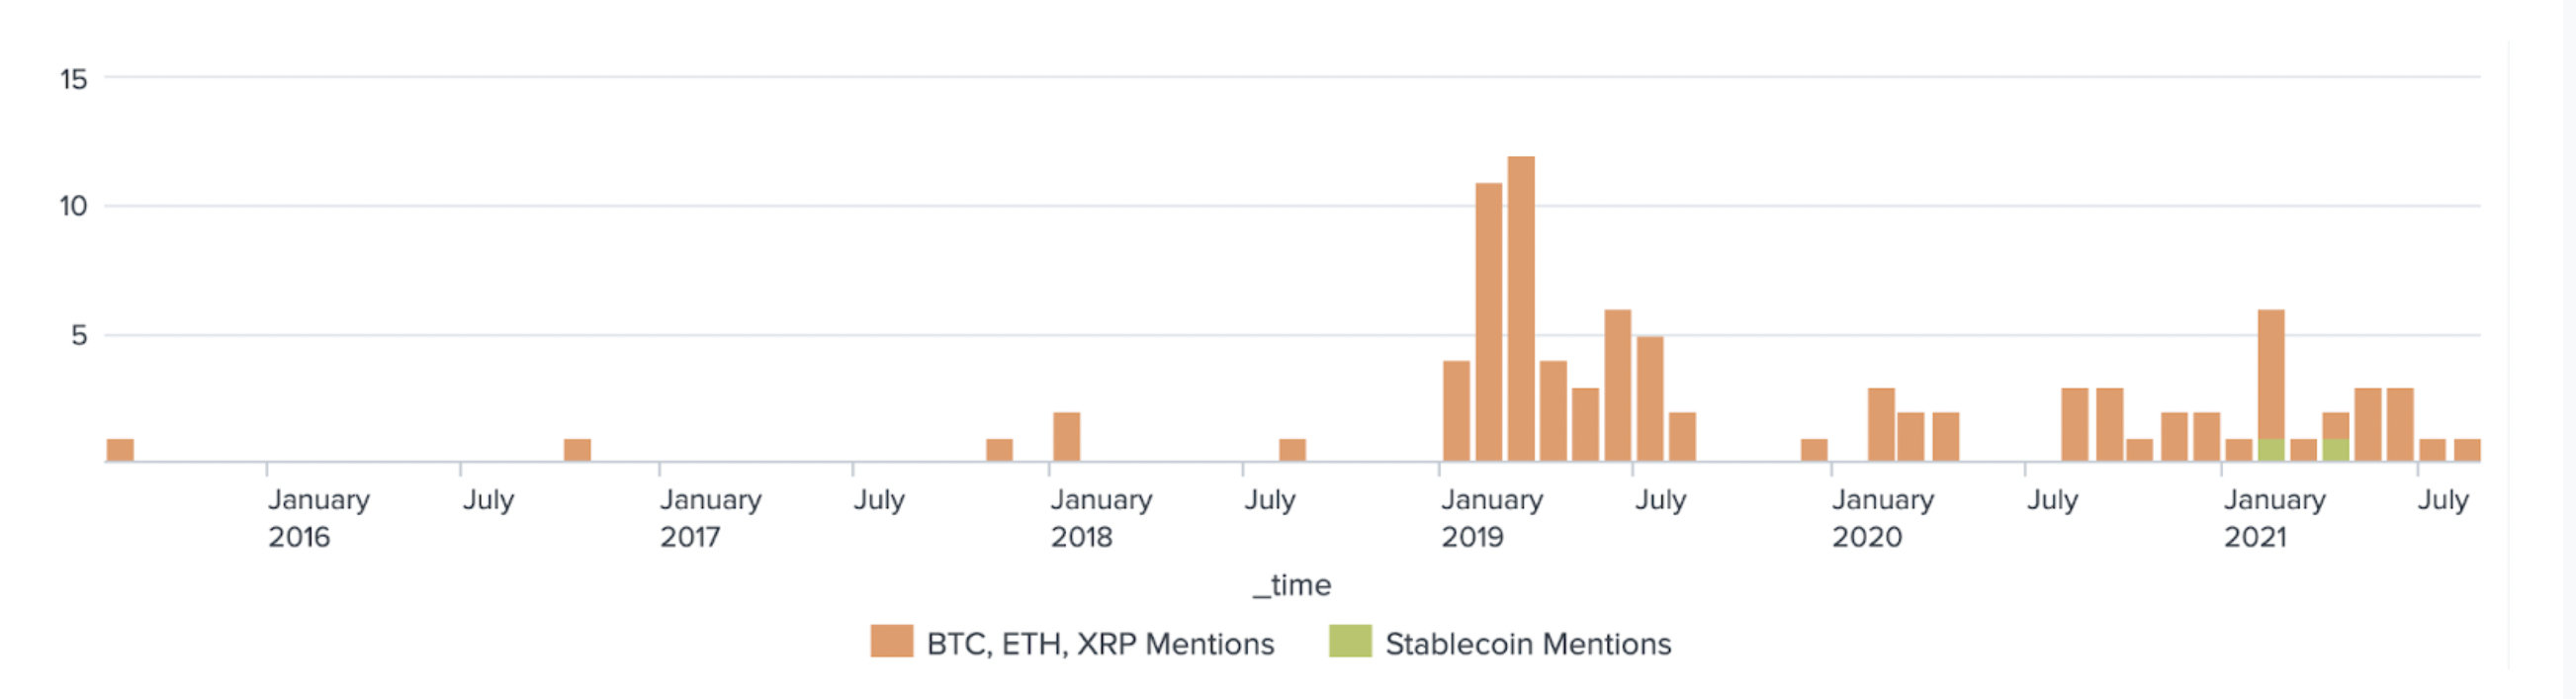 Stablecoins mentions within remittances-related discussions on Reddit, compared to BTC, ETH and XRP mentions